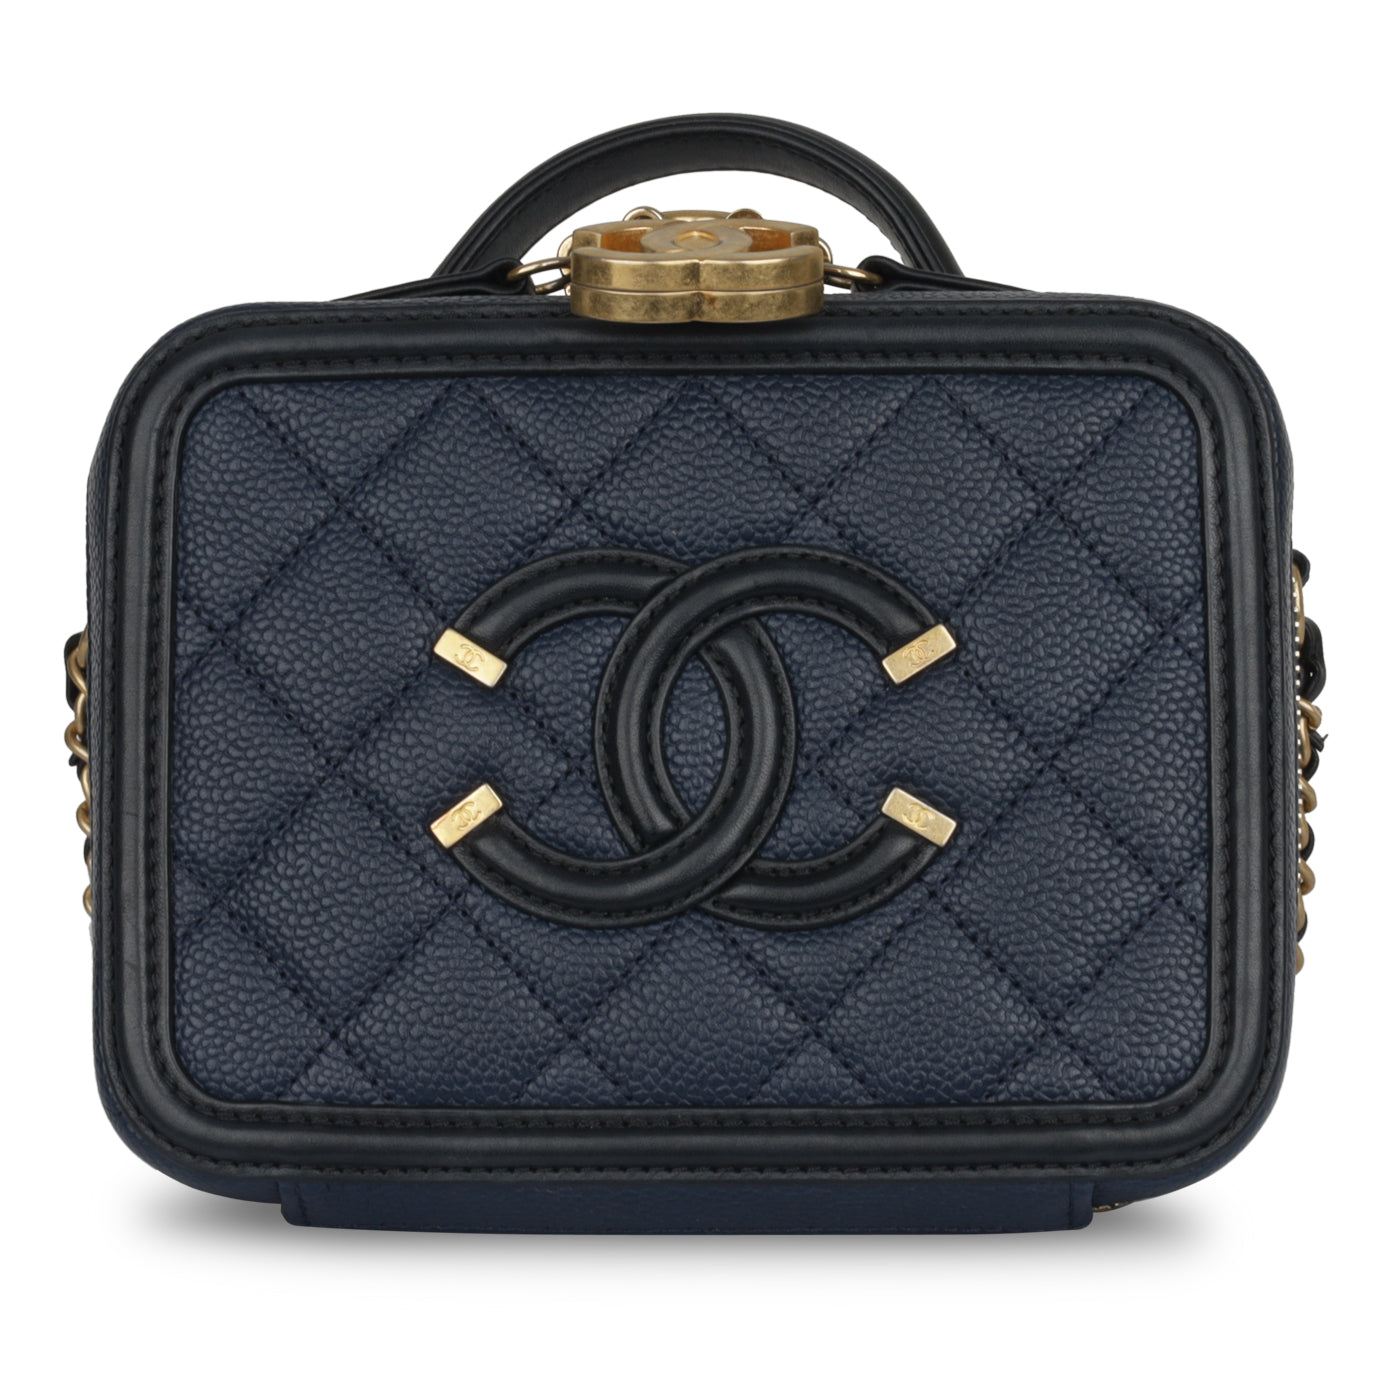 Chanel Navy Blue/Black Quilted Leather Small CC Filigree Vanity Case Bag